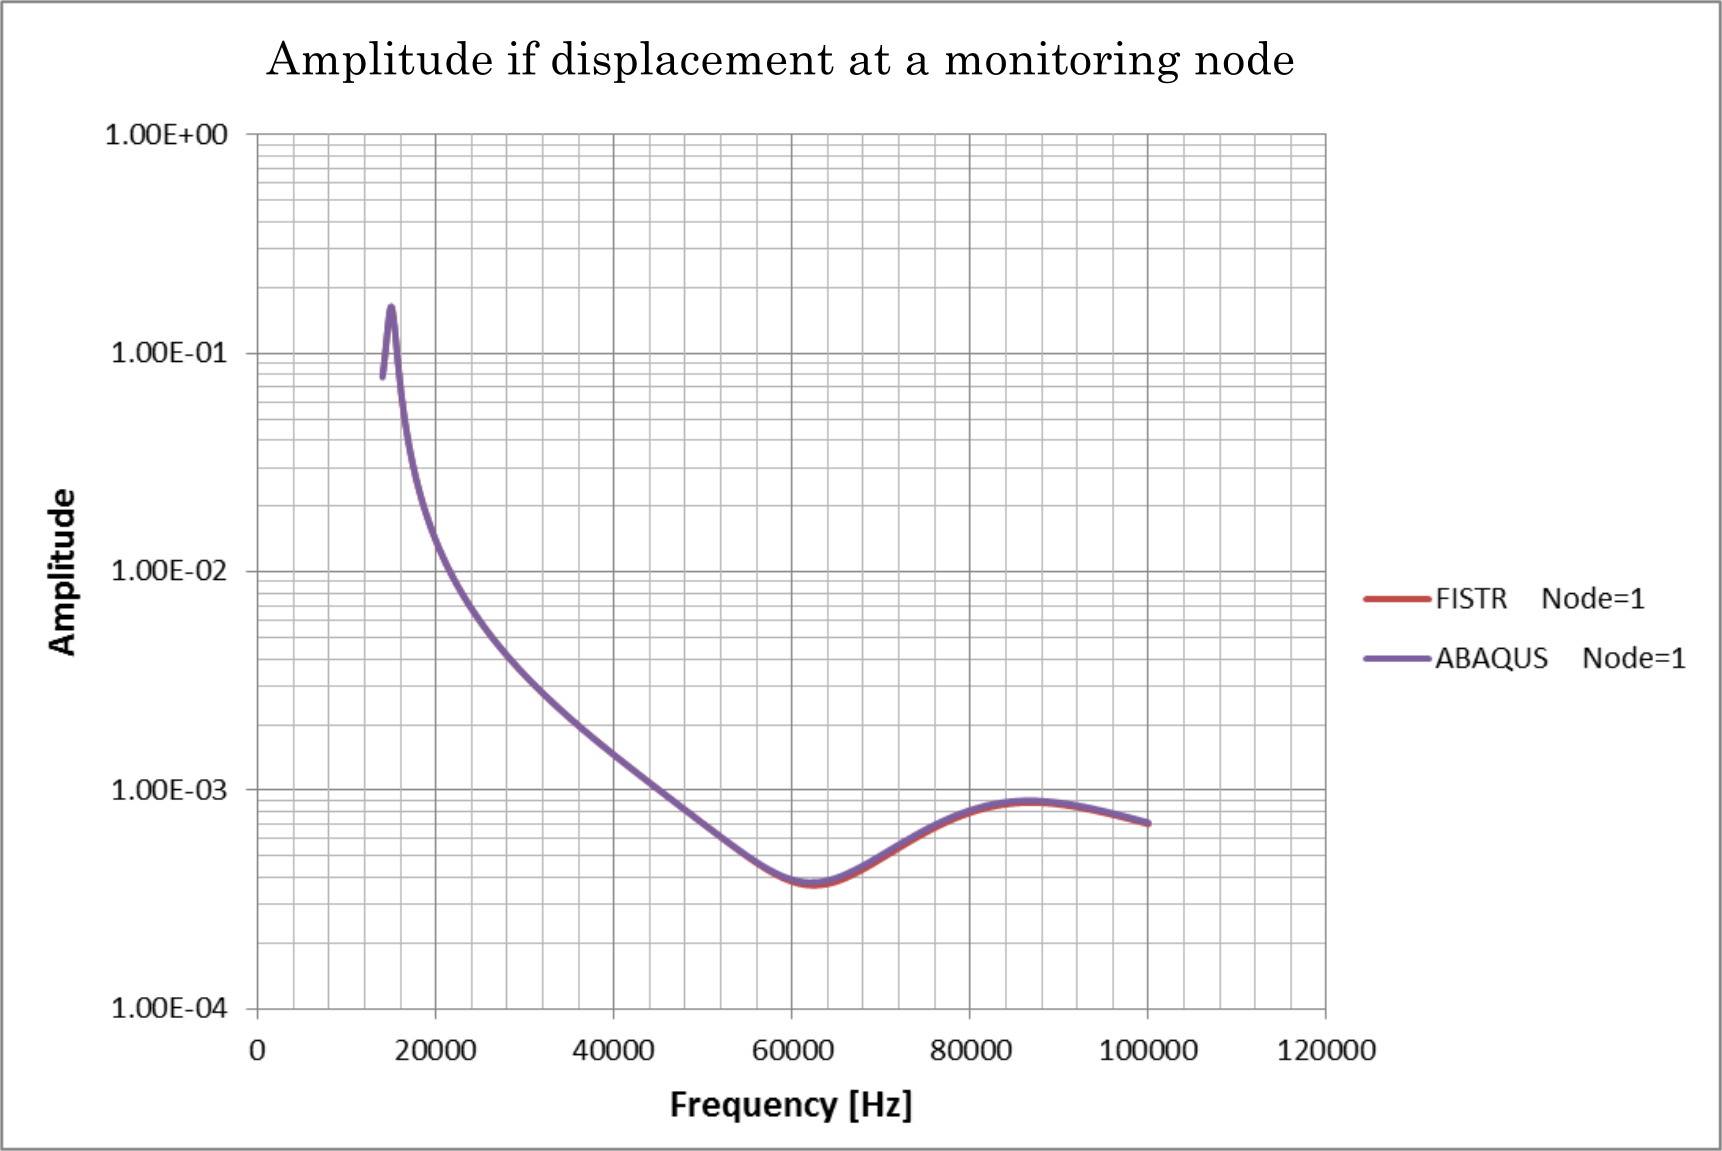 Relationship between frequency and displacement amplitude of the monitoring nodes